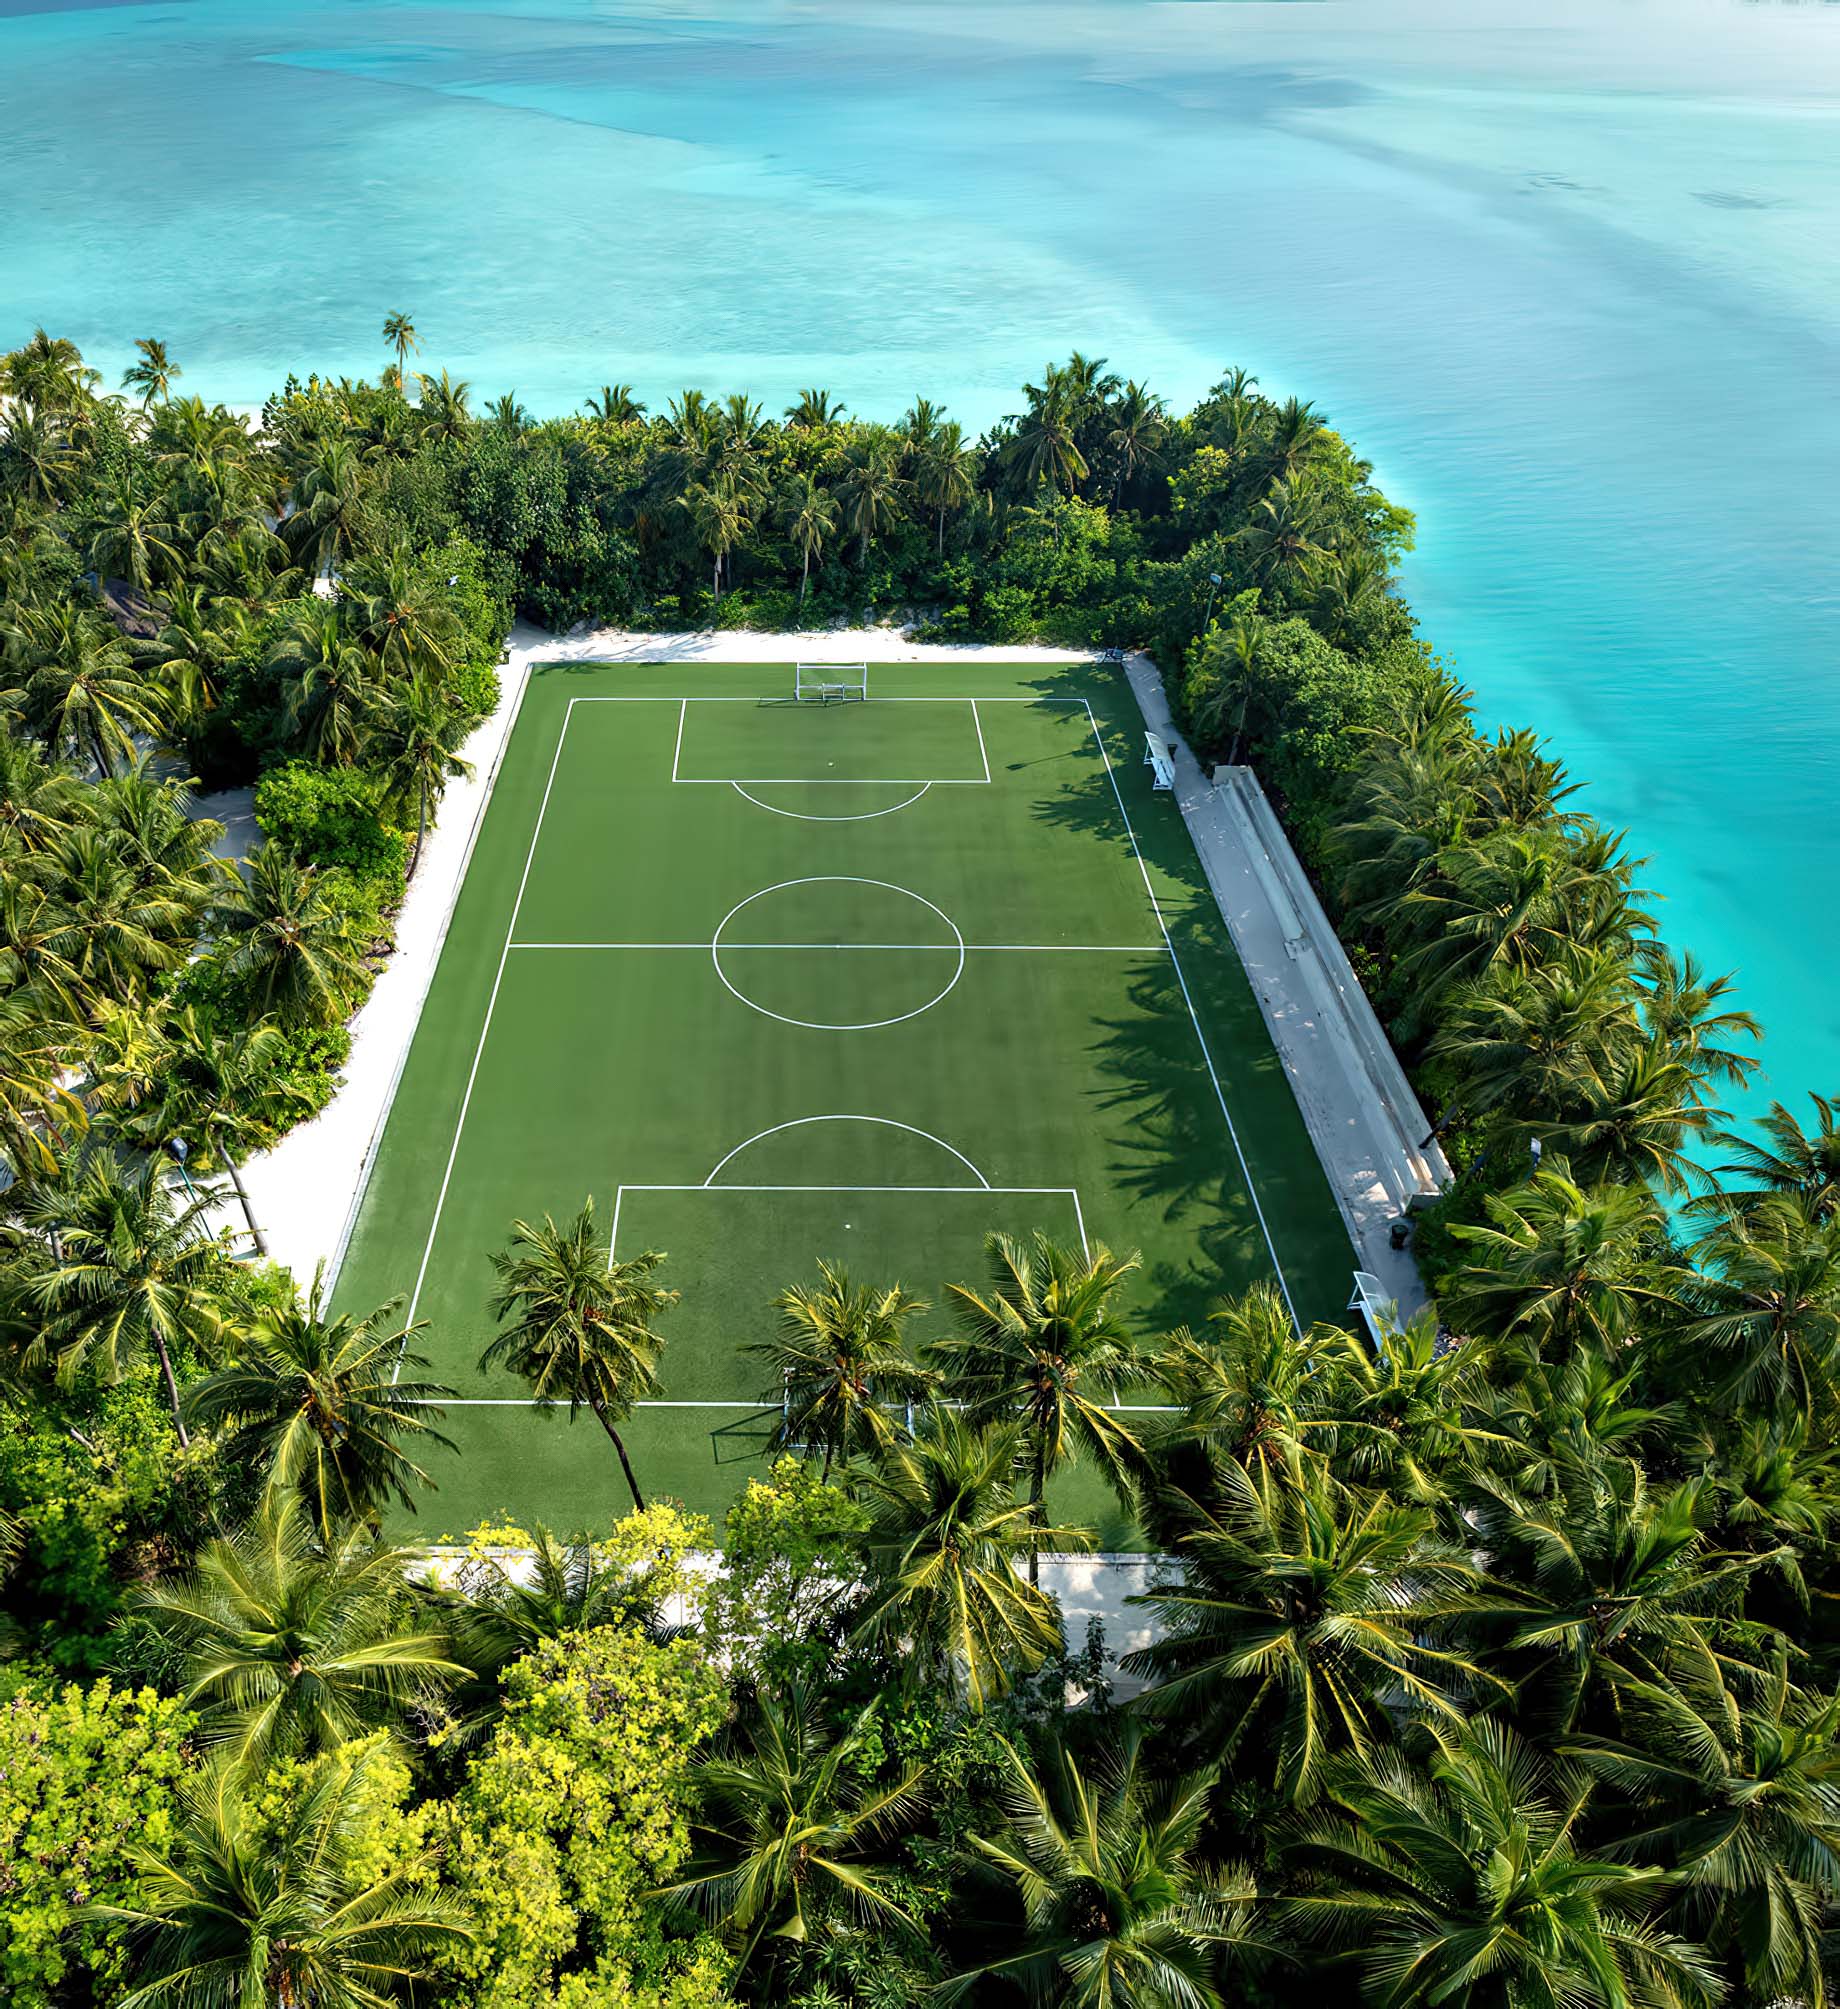 One&Only Reethi Rah Resort - North Male Atoll, Maldives - Club One Football Soccer Pitch